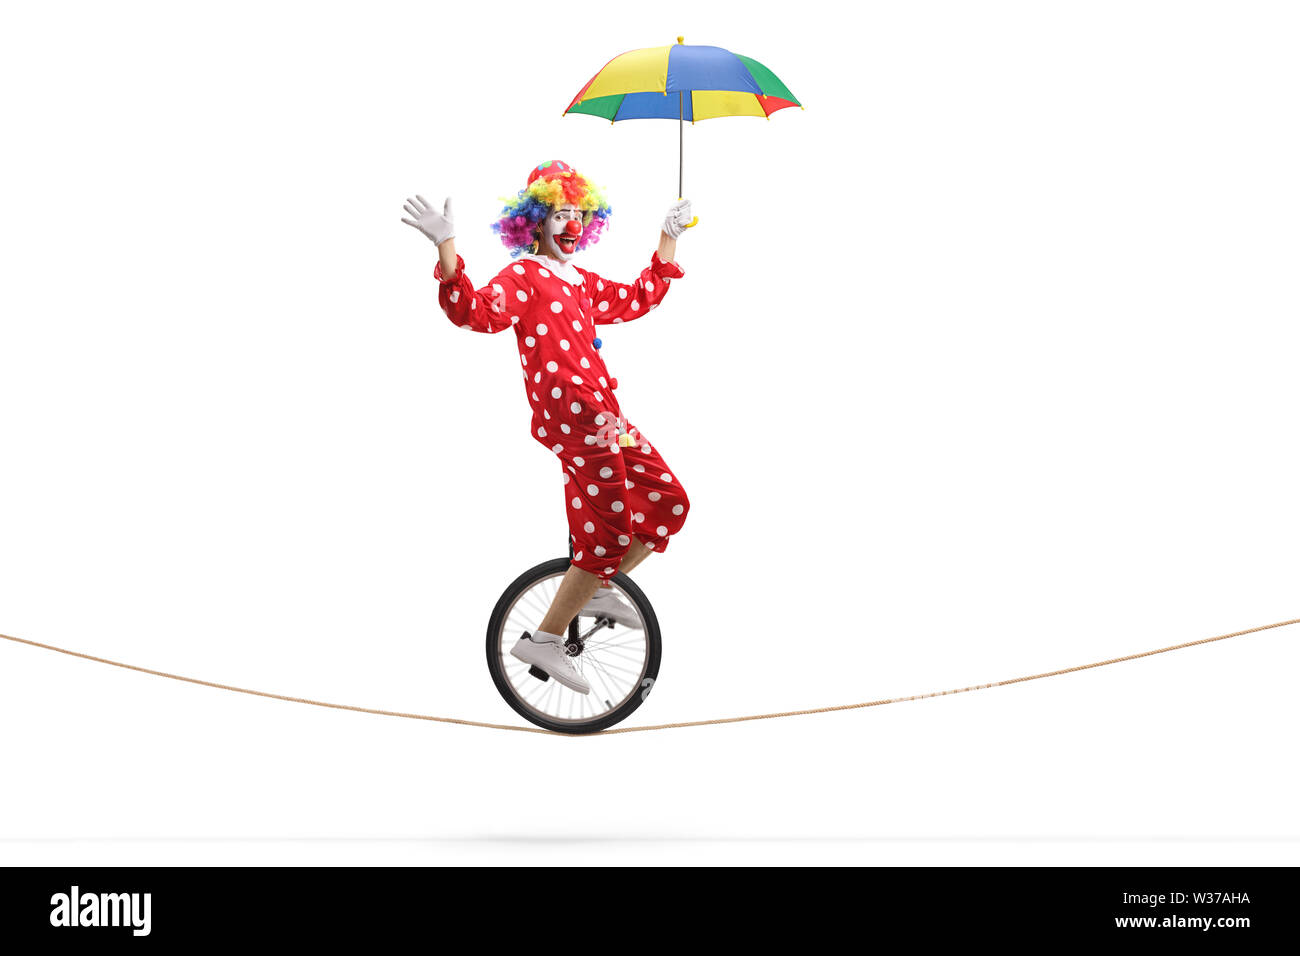 Full length profile shot of a clown riding a unicycle on a rope and holding an umbrella isolated on white background Stock Photo